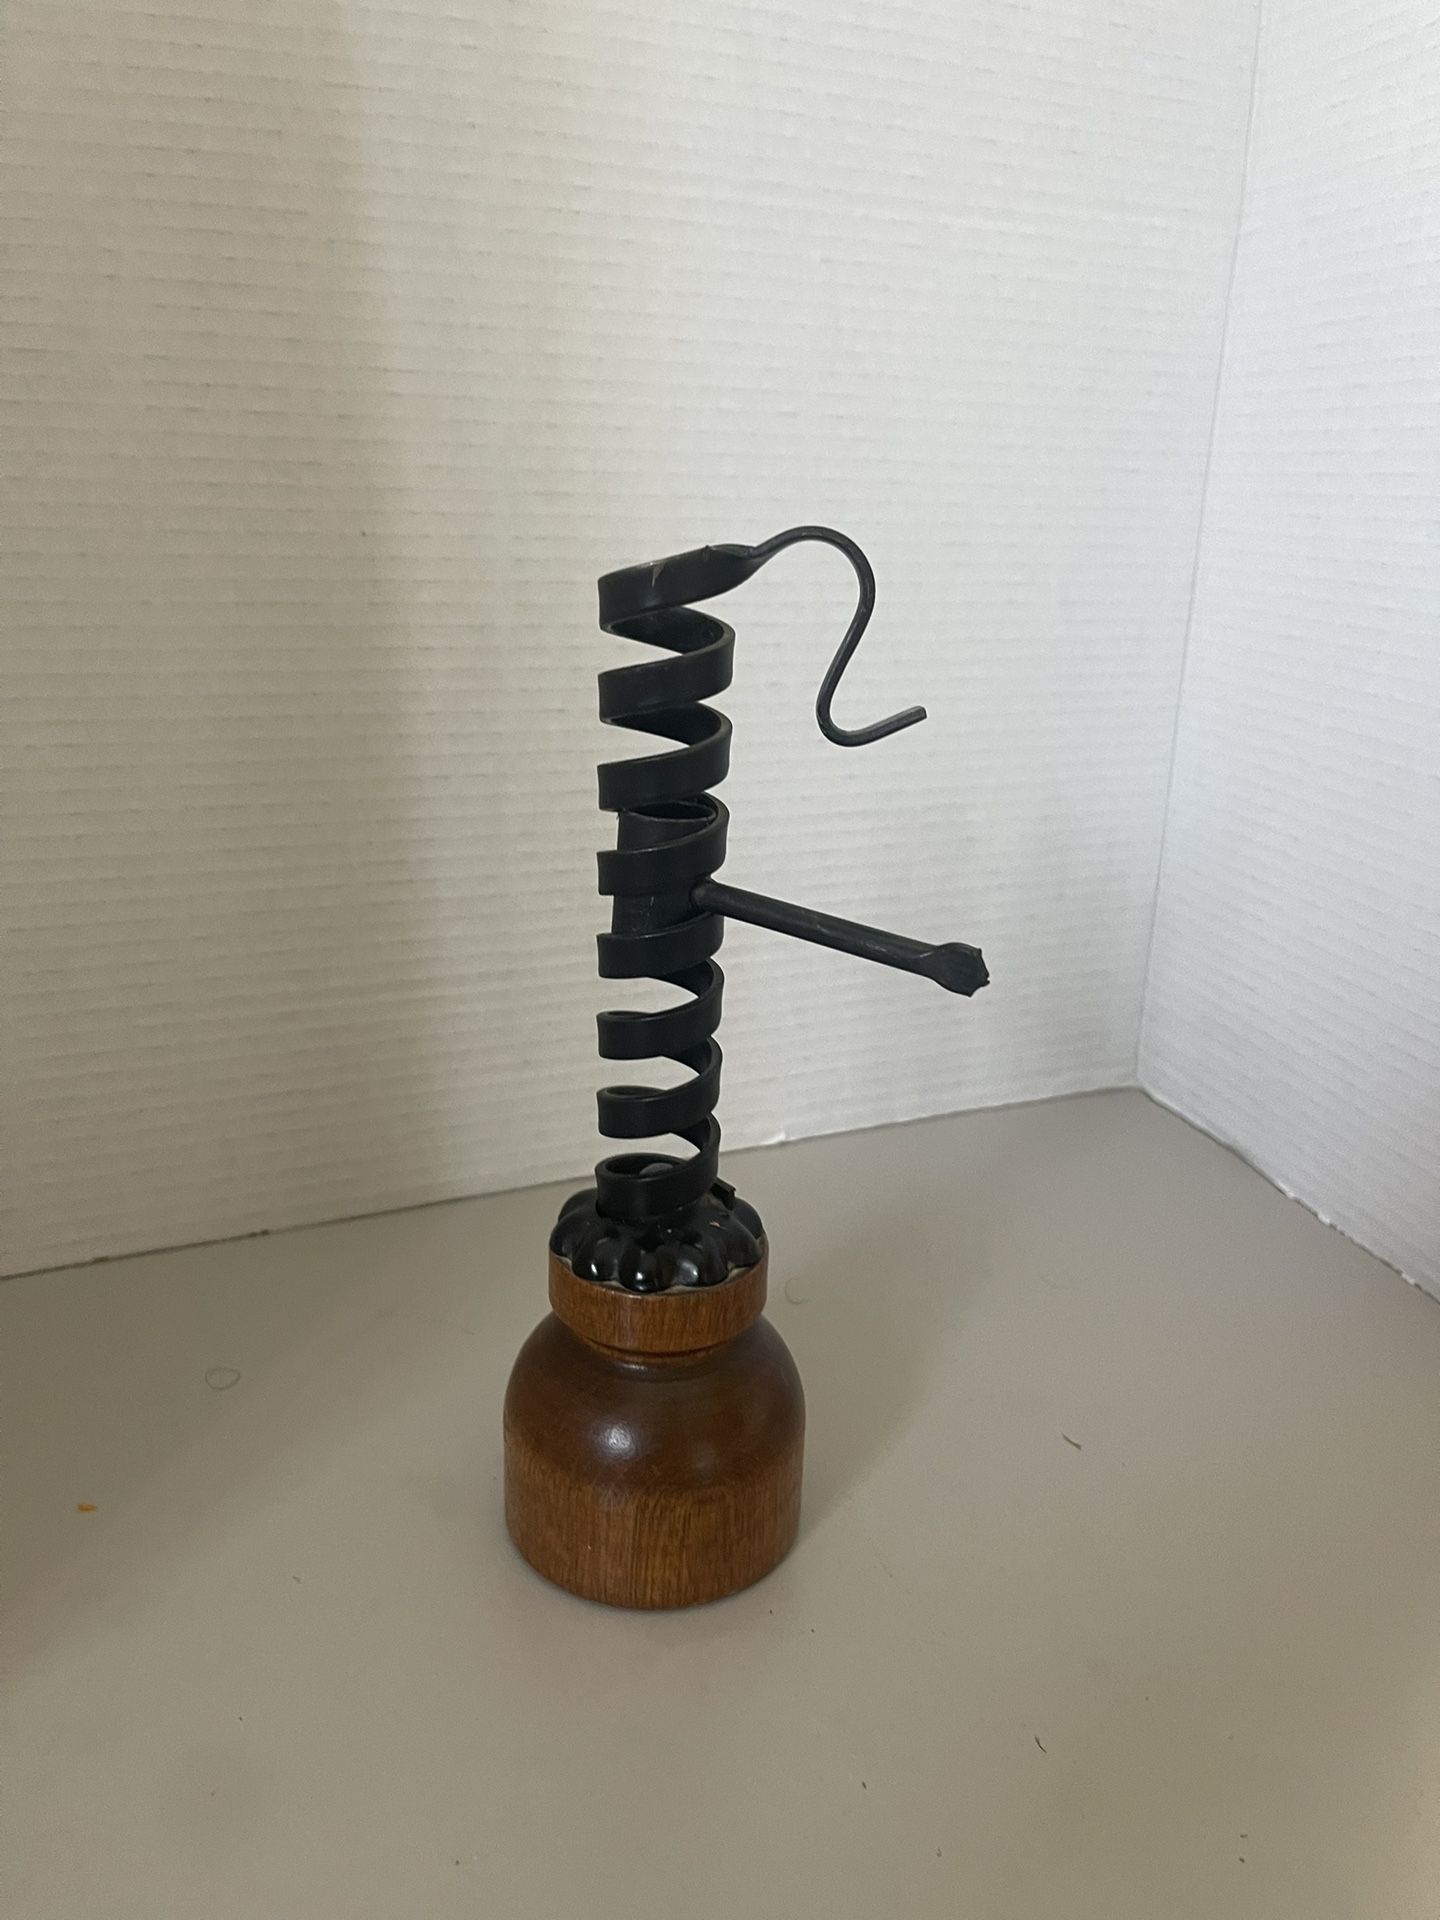 Vintage Courting Candle Holder Black Spiral Push Up Wrought Iron Wood Base Works